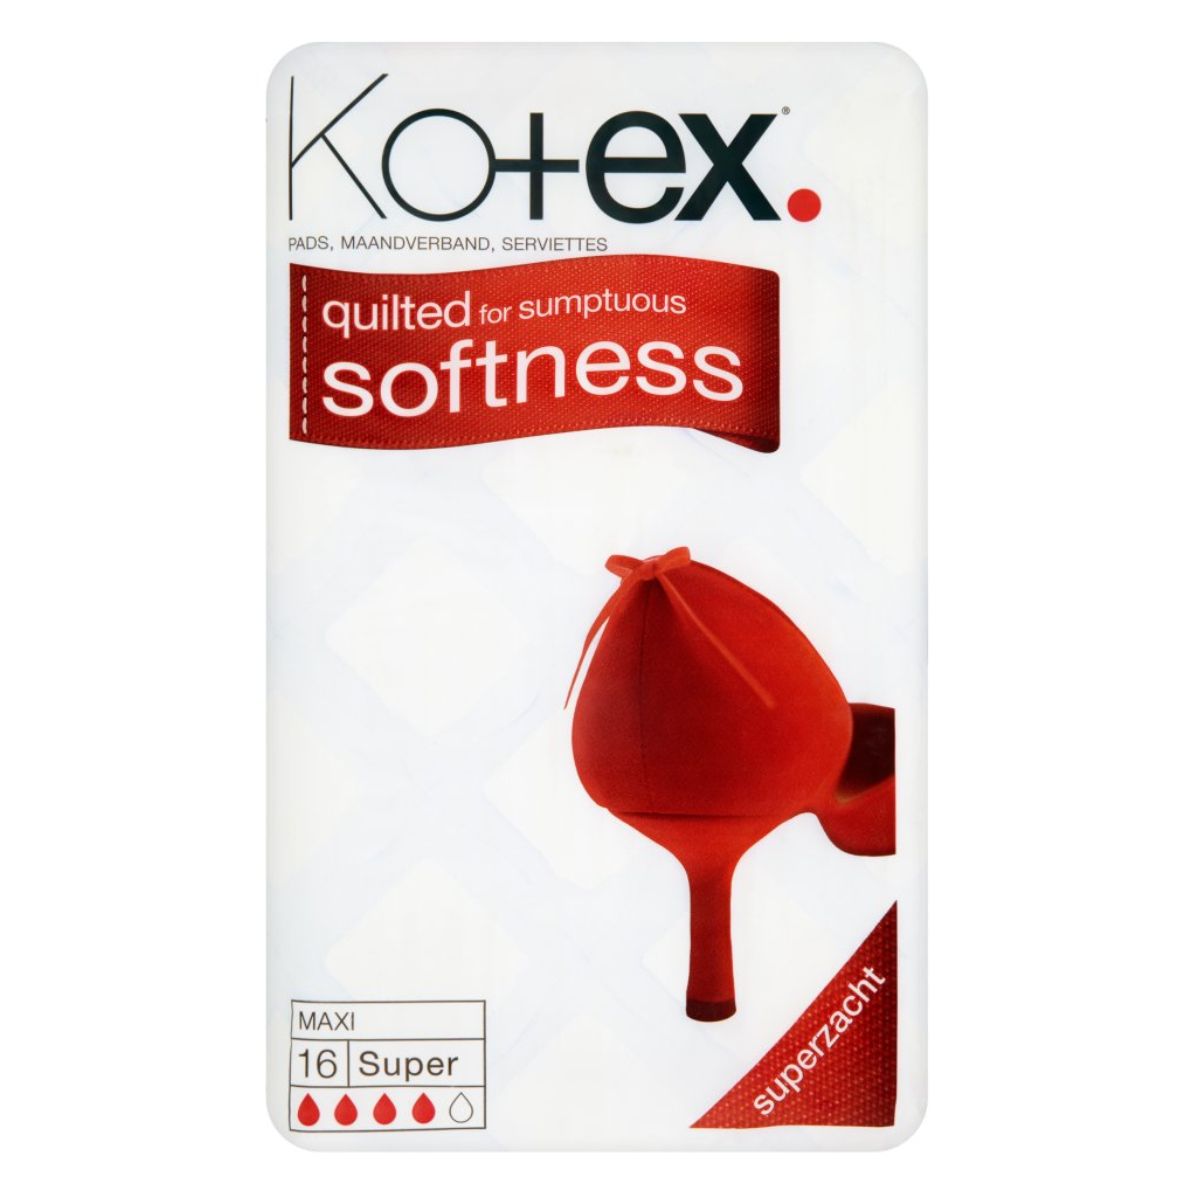 A package of Kotex Maxi Super - 16 Pads with a red quilting to signify softness.